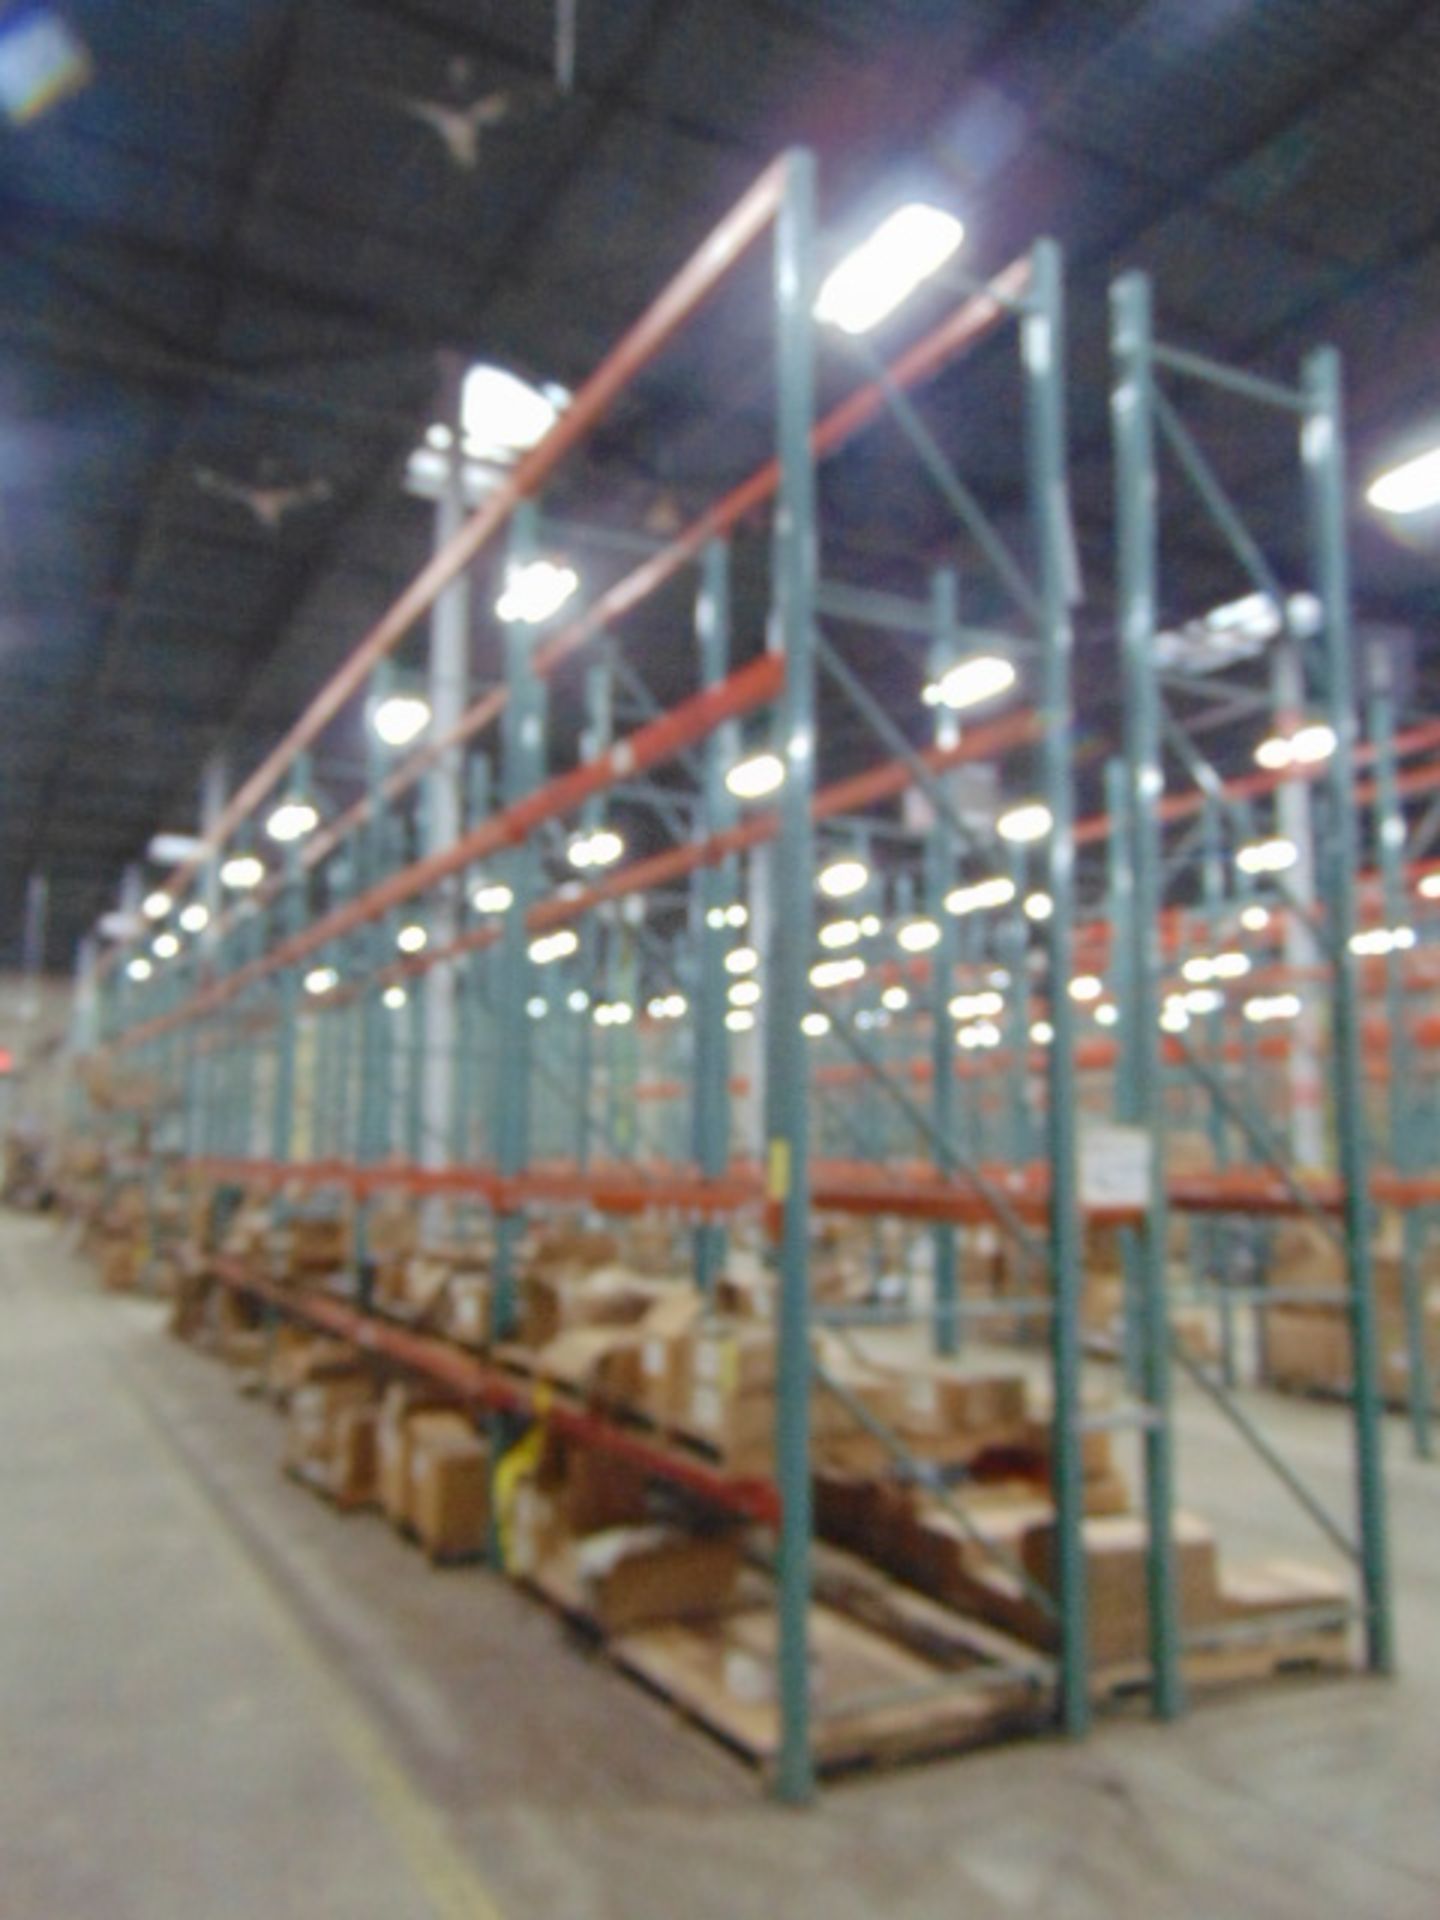 LOT OF PALLET RACK SECTIONS (42), 16' ht. x 92"W. x 42" dp.